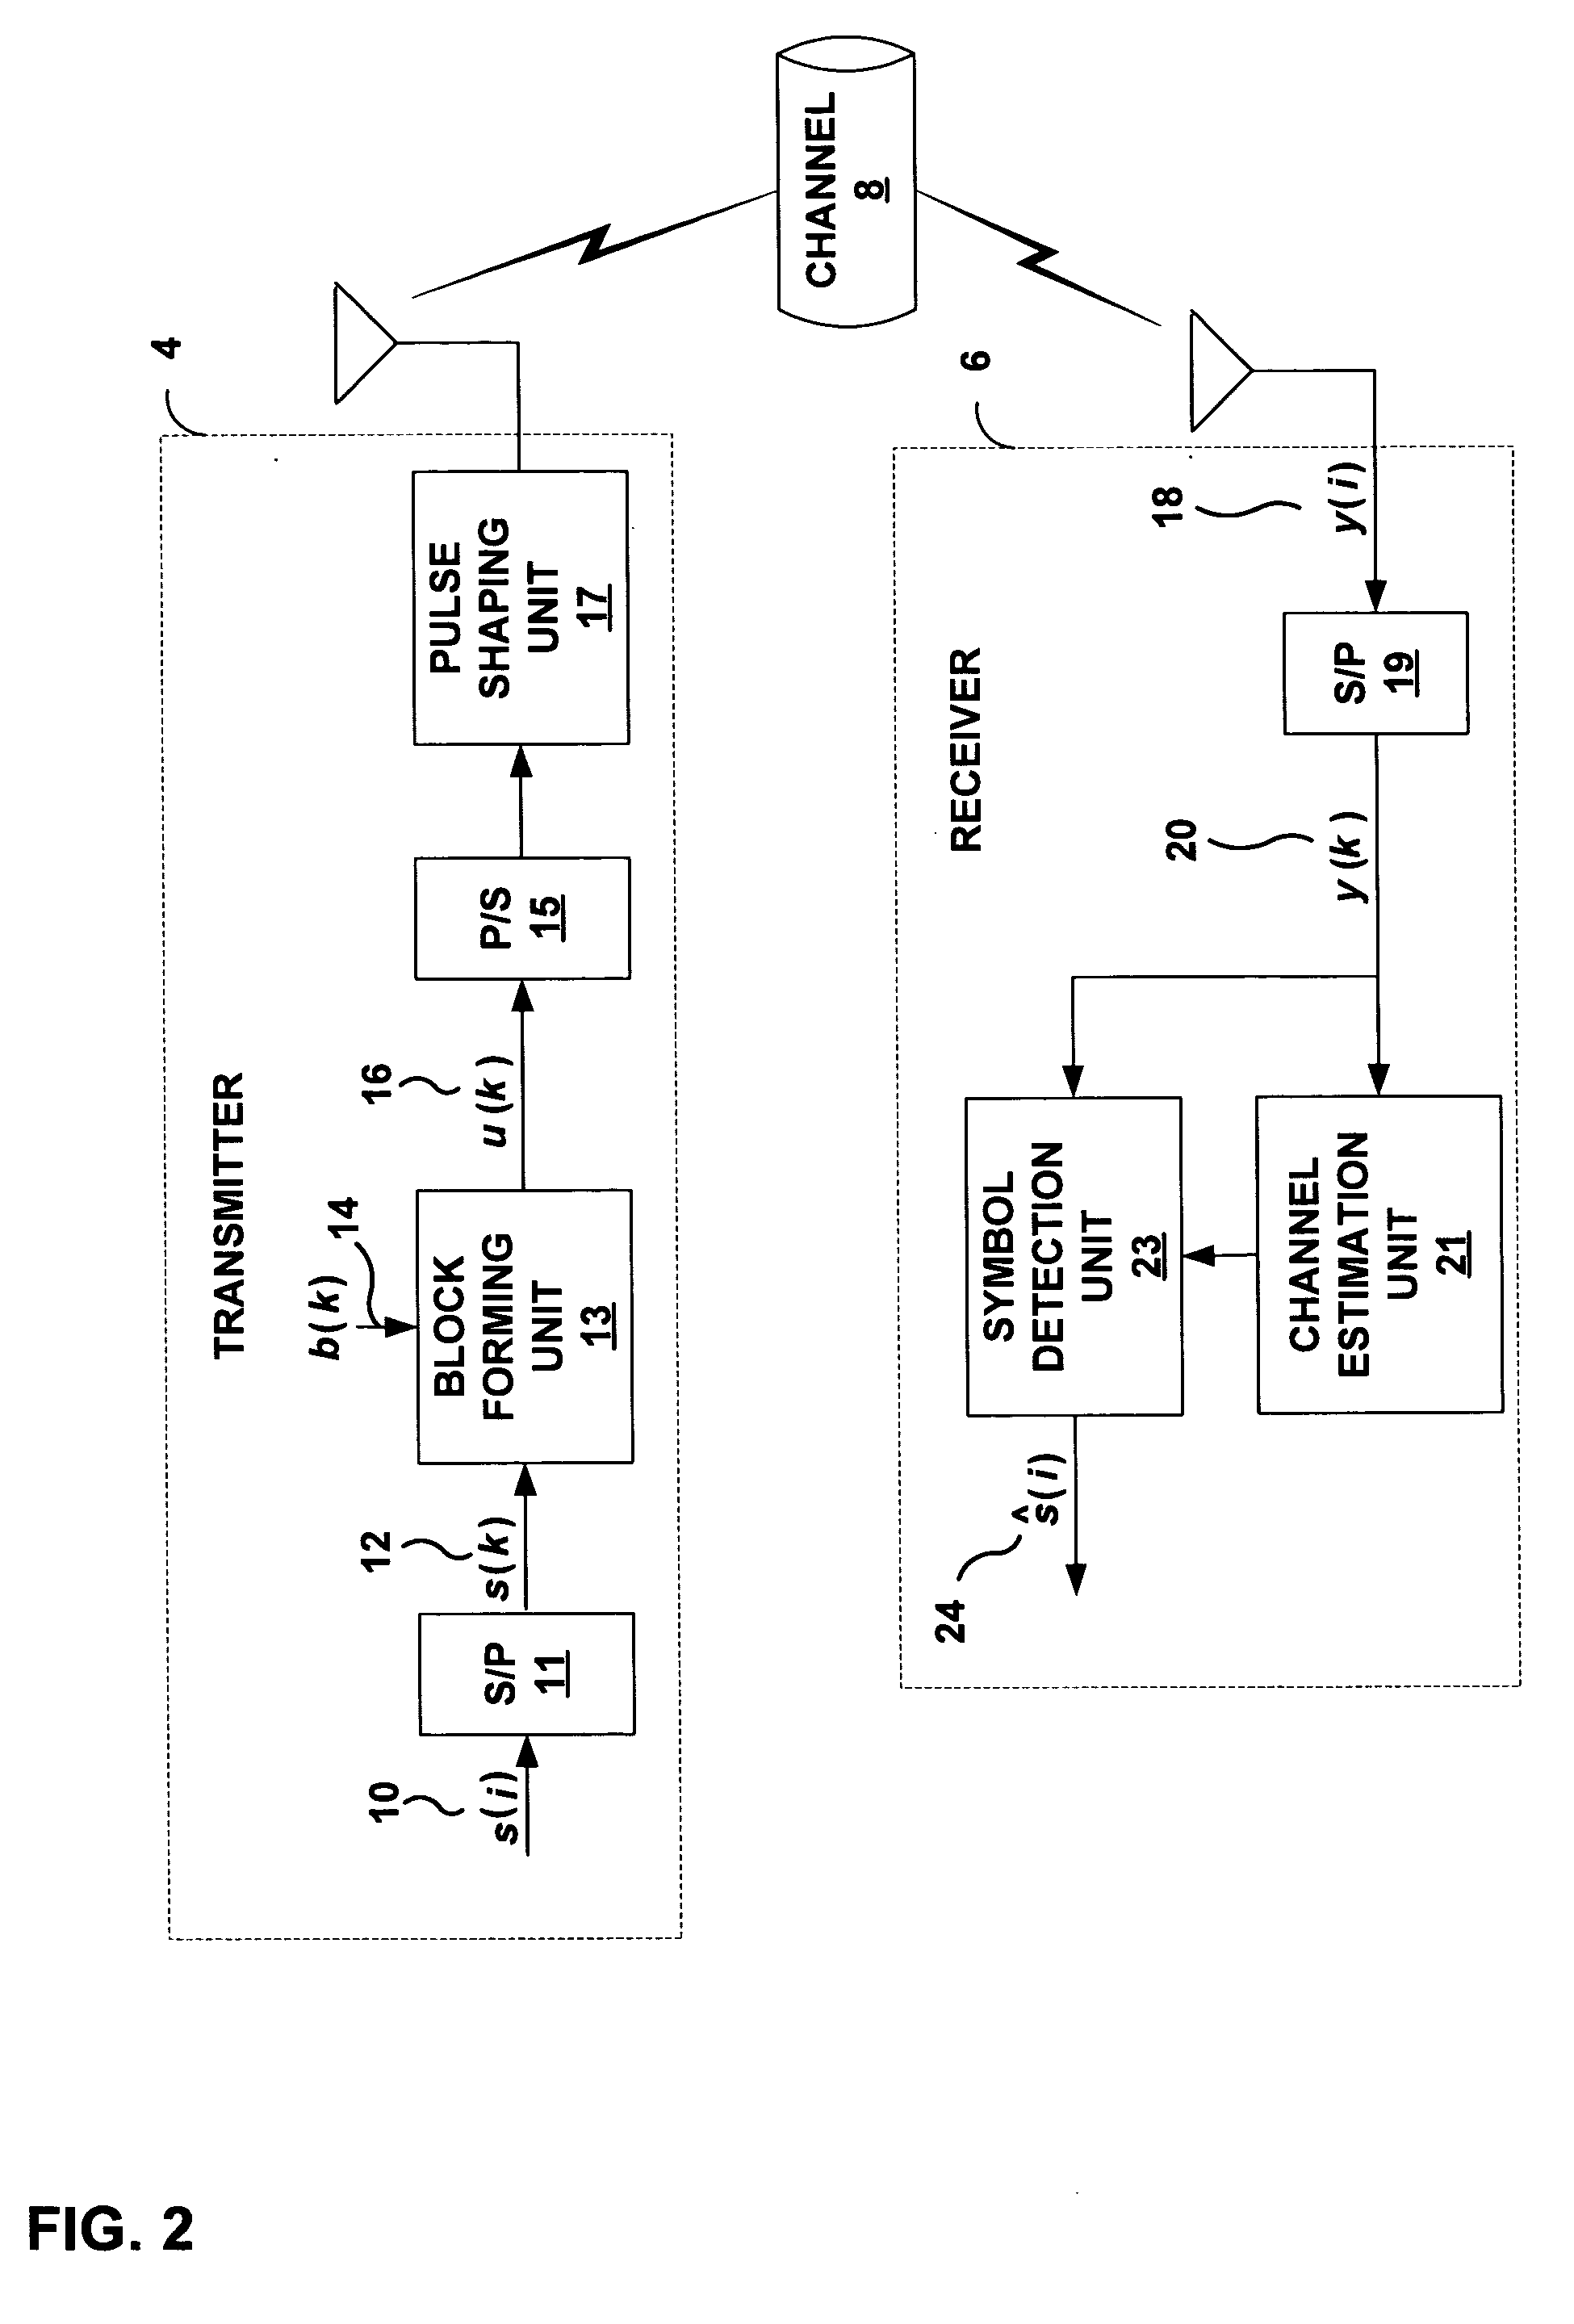 Channel estimation for block transmissions over time-and frequency-selective wireless fading channels